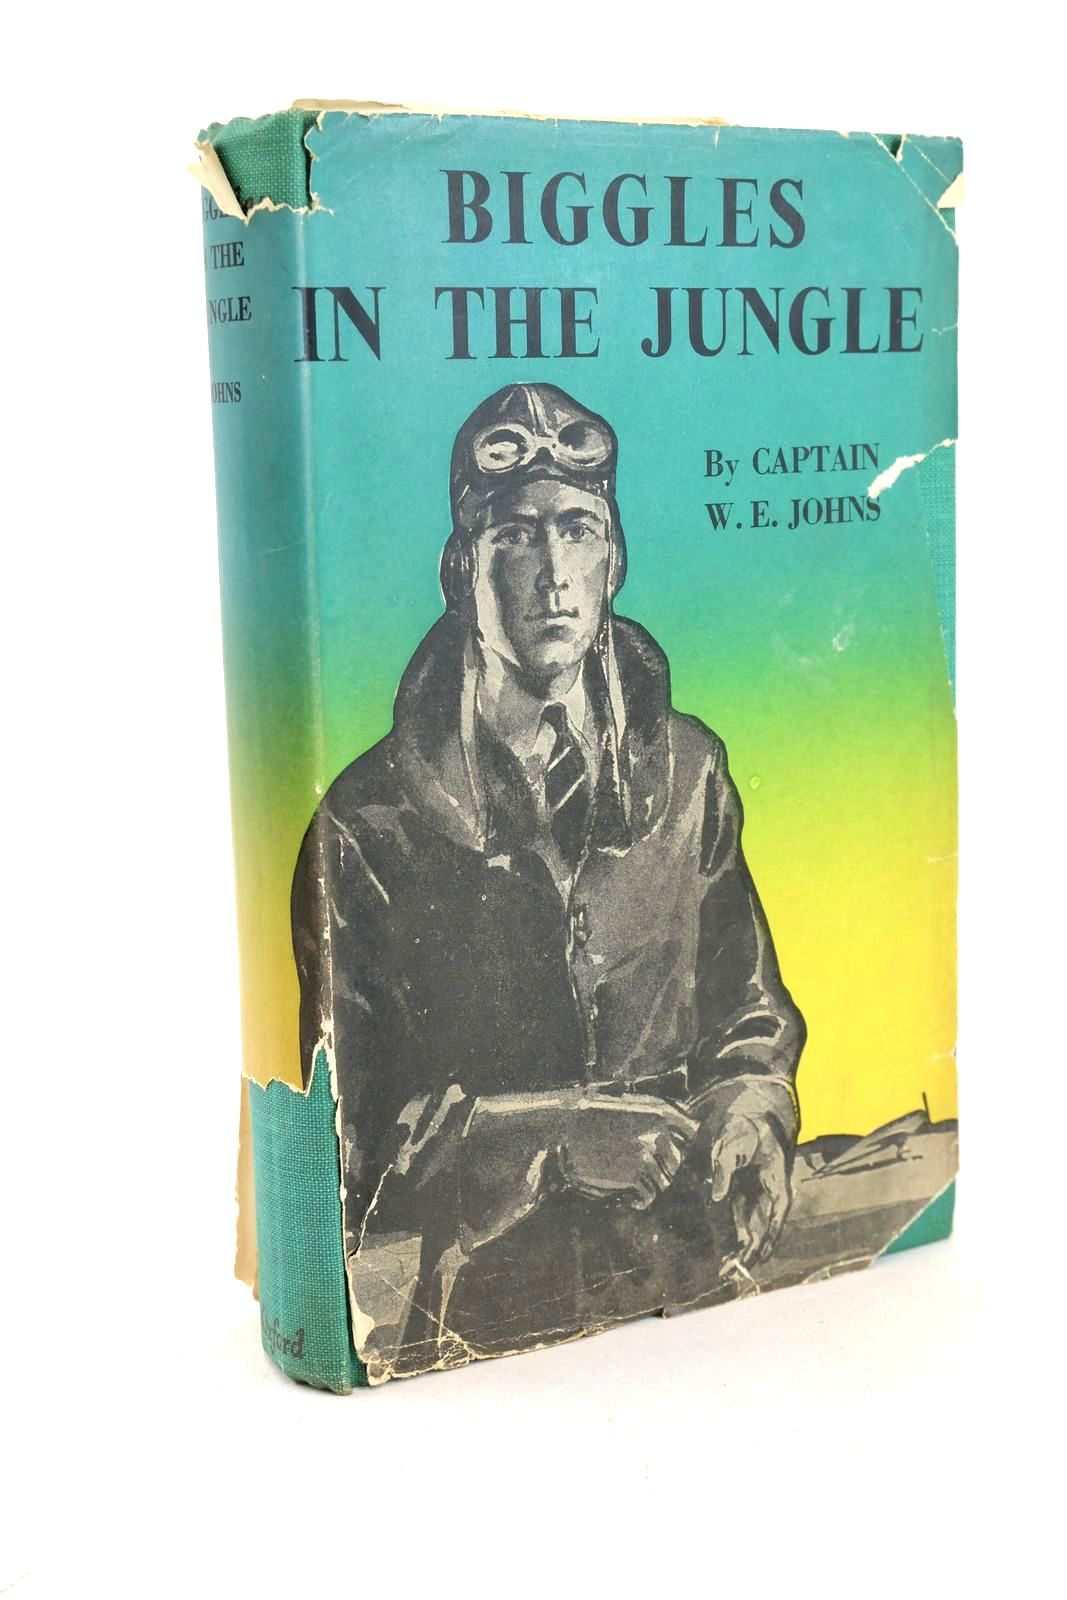 Photo of BIGGLES IN THE JUNGLE written by Johns, W.E. illustrated by Cuneo, Terence published by Oxford University Press, Geoffrey Cumberlege (STOCK CODE: 1327204)  for sale by Stella & Rose's Books